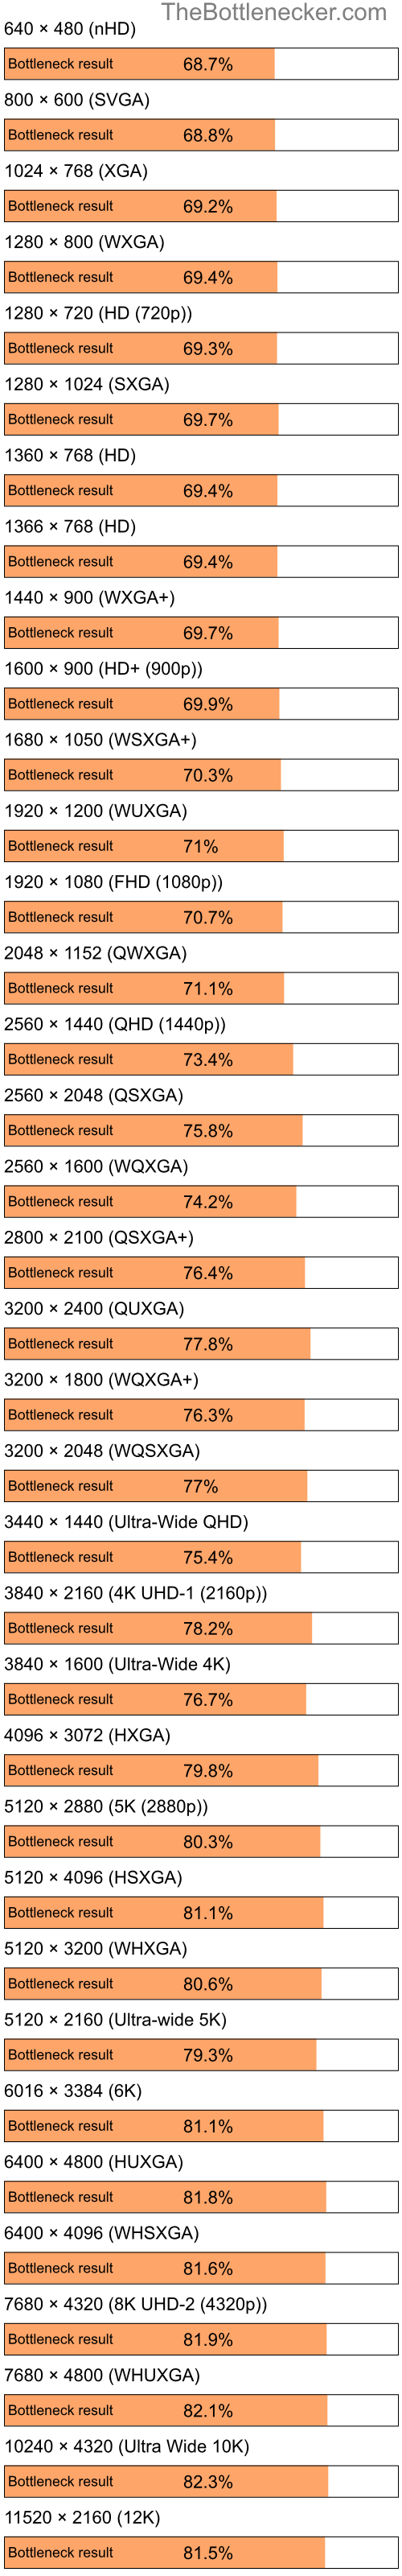 Bottleneck results by resolution for Intel Pentium 4 and NVIDIA GeForce 310M in Graphic Card Intense Tasks